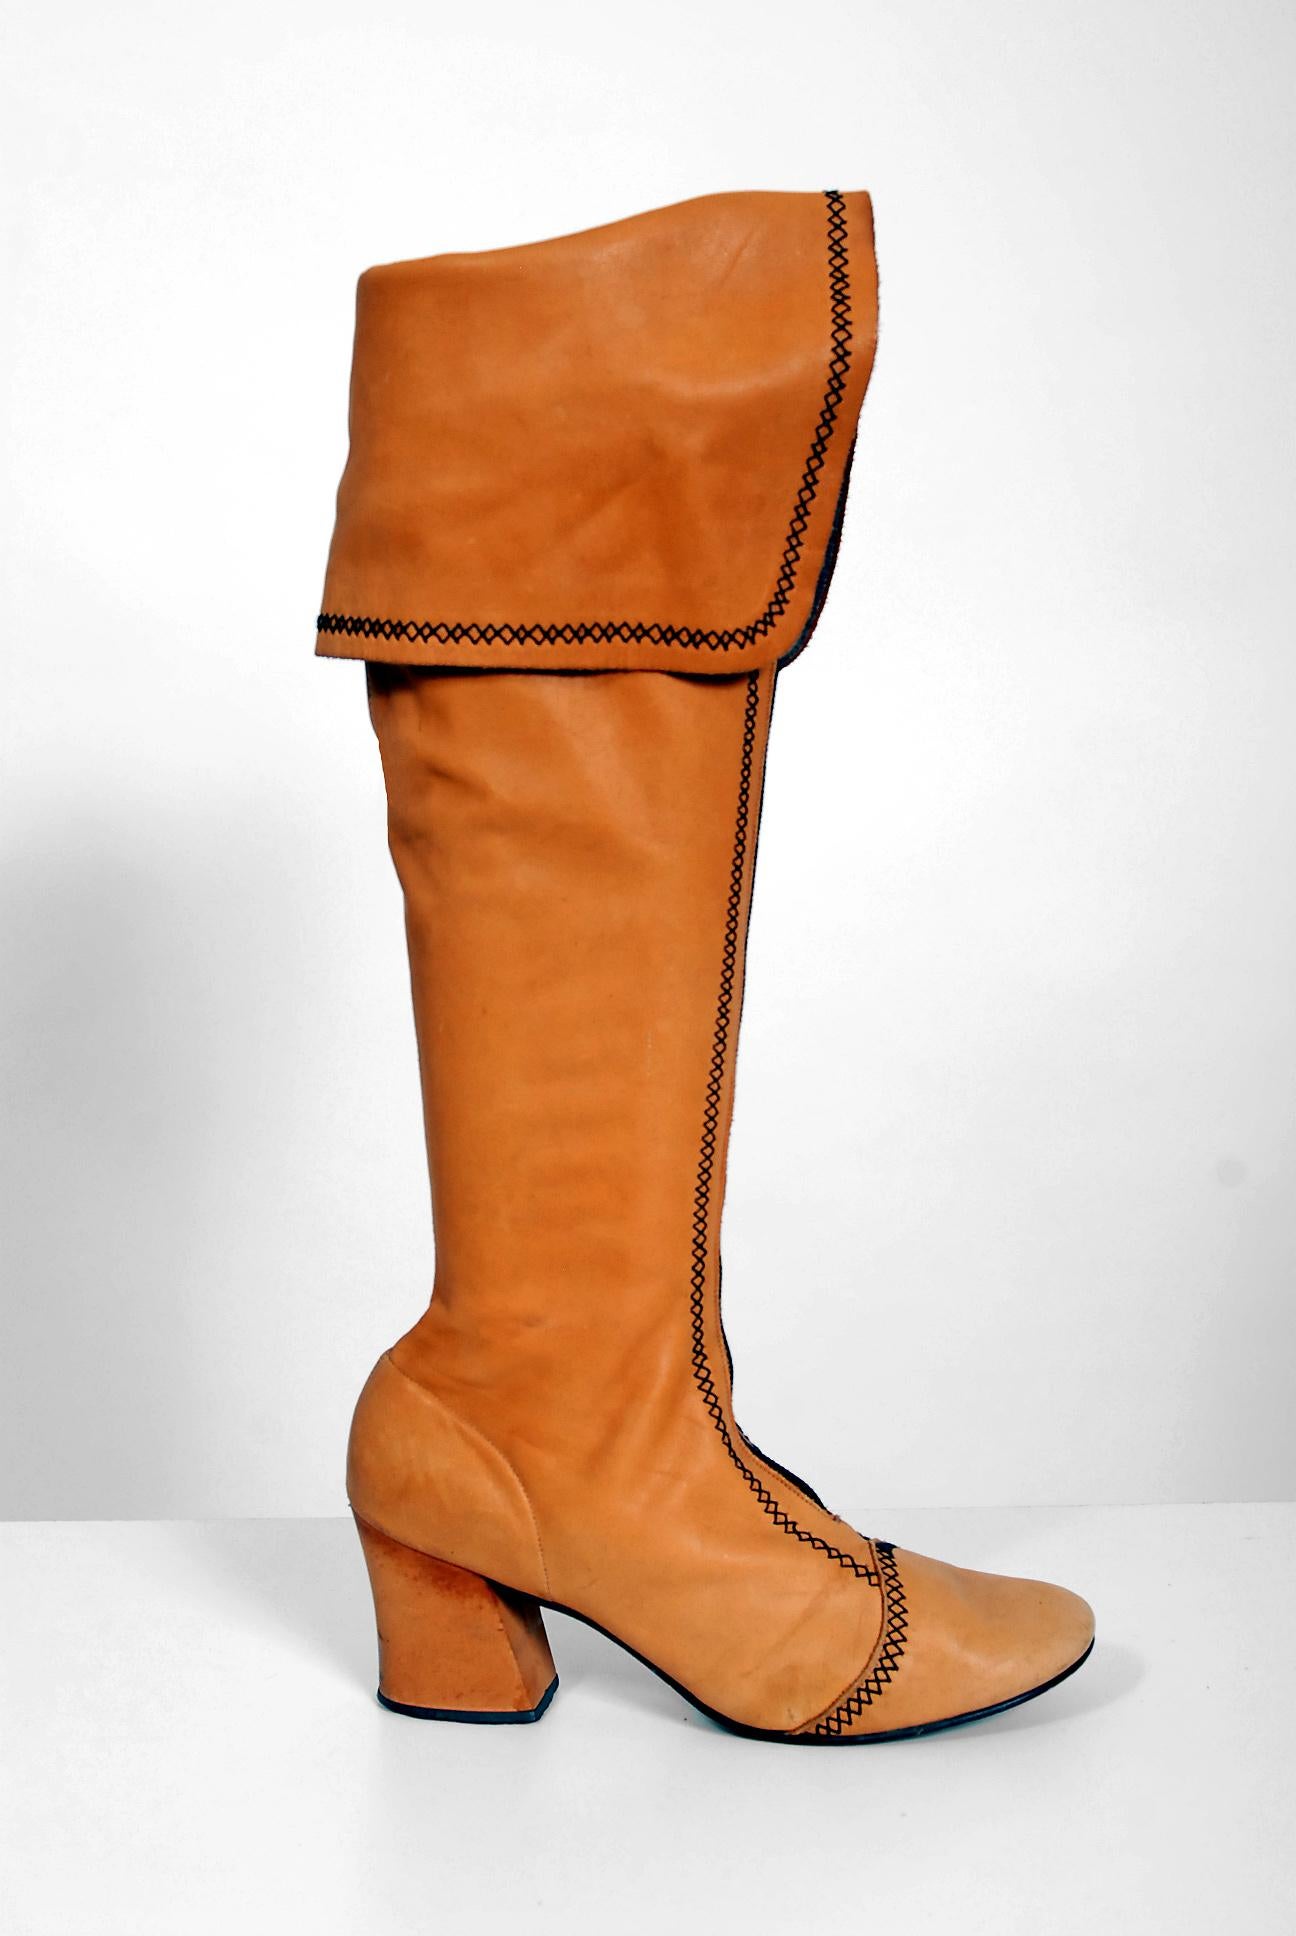 Sensational 1970's bohemian pirate boots in the most amazing wide-cuff style! The leather used is ultra-soft with unique embroidered trim throughout. I love the front zip-up construction and comfortable low heel. Many modern shoes are a complete